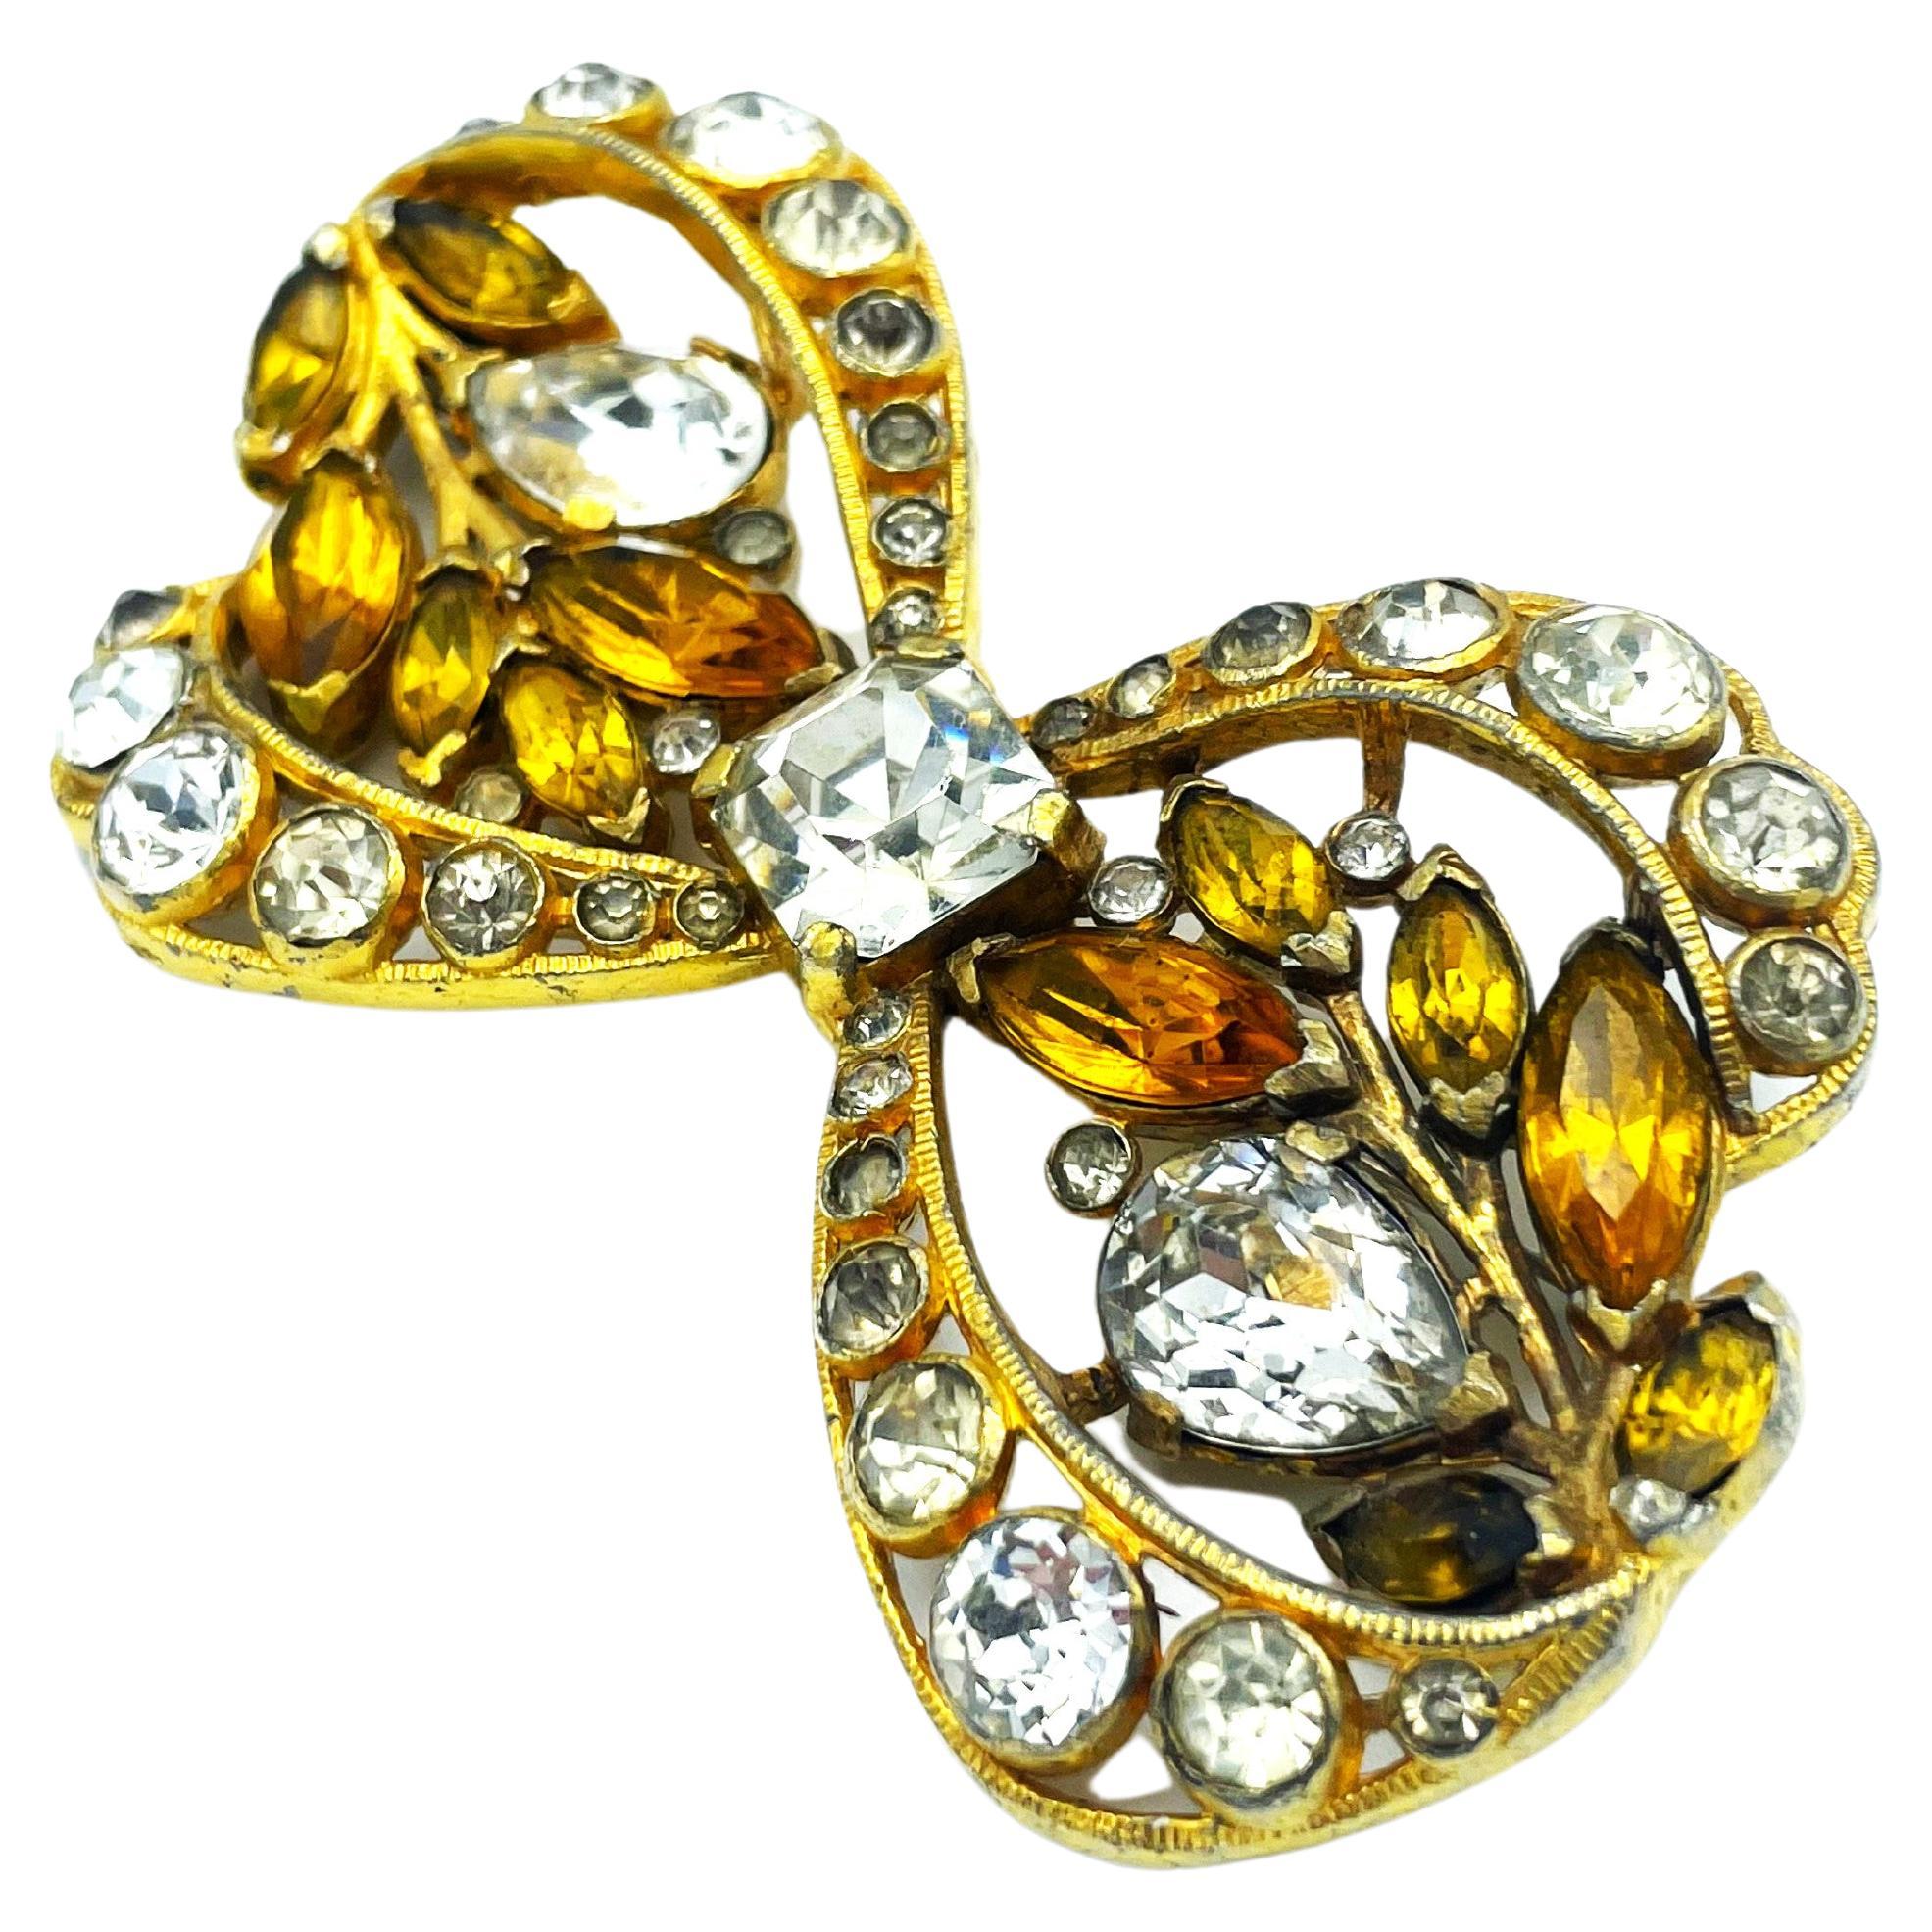 ABOUT
Vintage EISENBERG ORIGINAL loop brooch, fully covered with clear and topas faceted  rhinestones, USA 1040
Measurement
Width 9 cm
High   5 cm 
Deep  1 cm
Features 
- Eisenberg Original signed on the back 
- fully covered with cut rhinestones